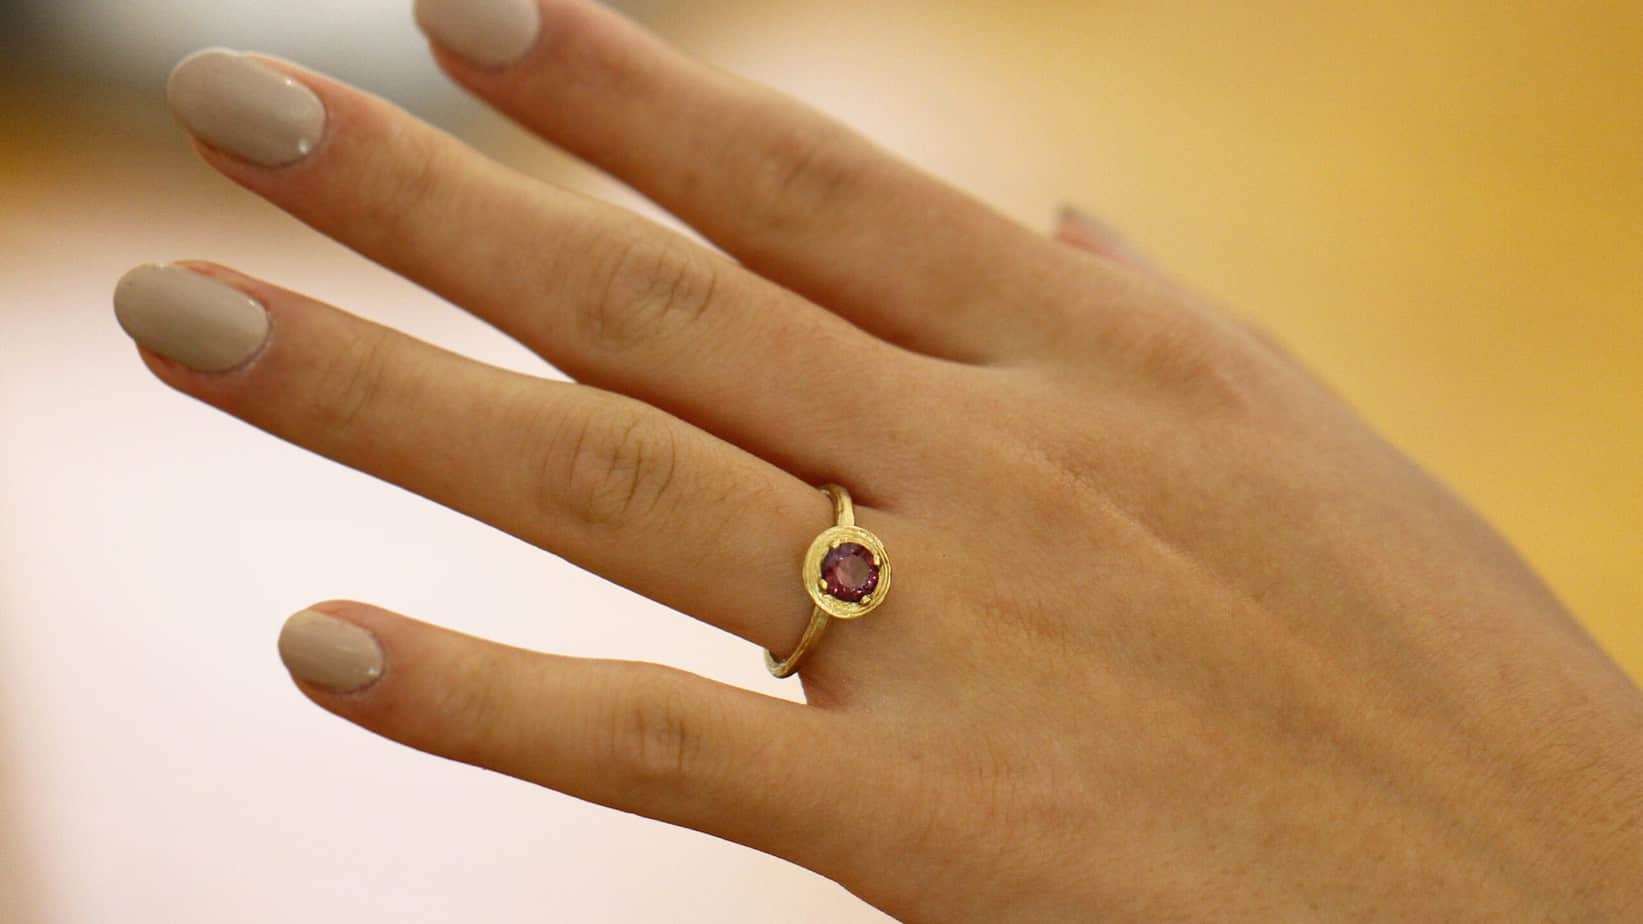 9k Fair Trade Yellow Gold Spinel Ring